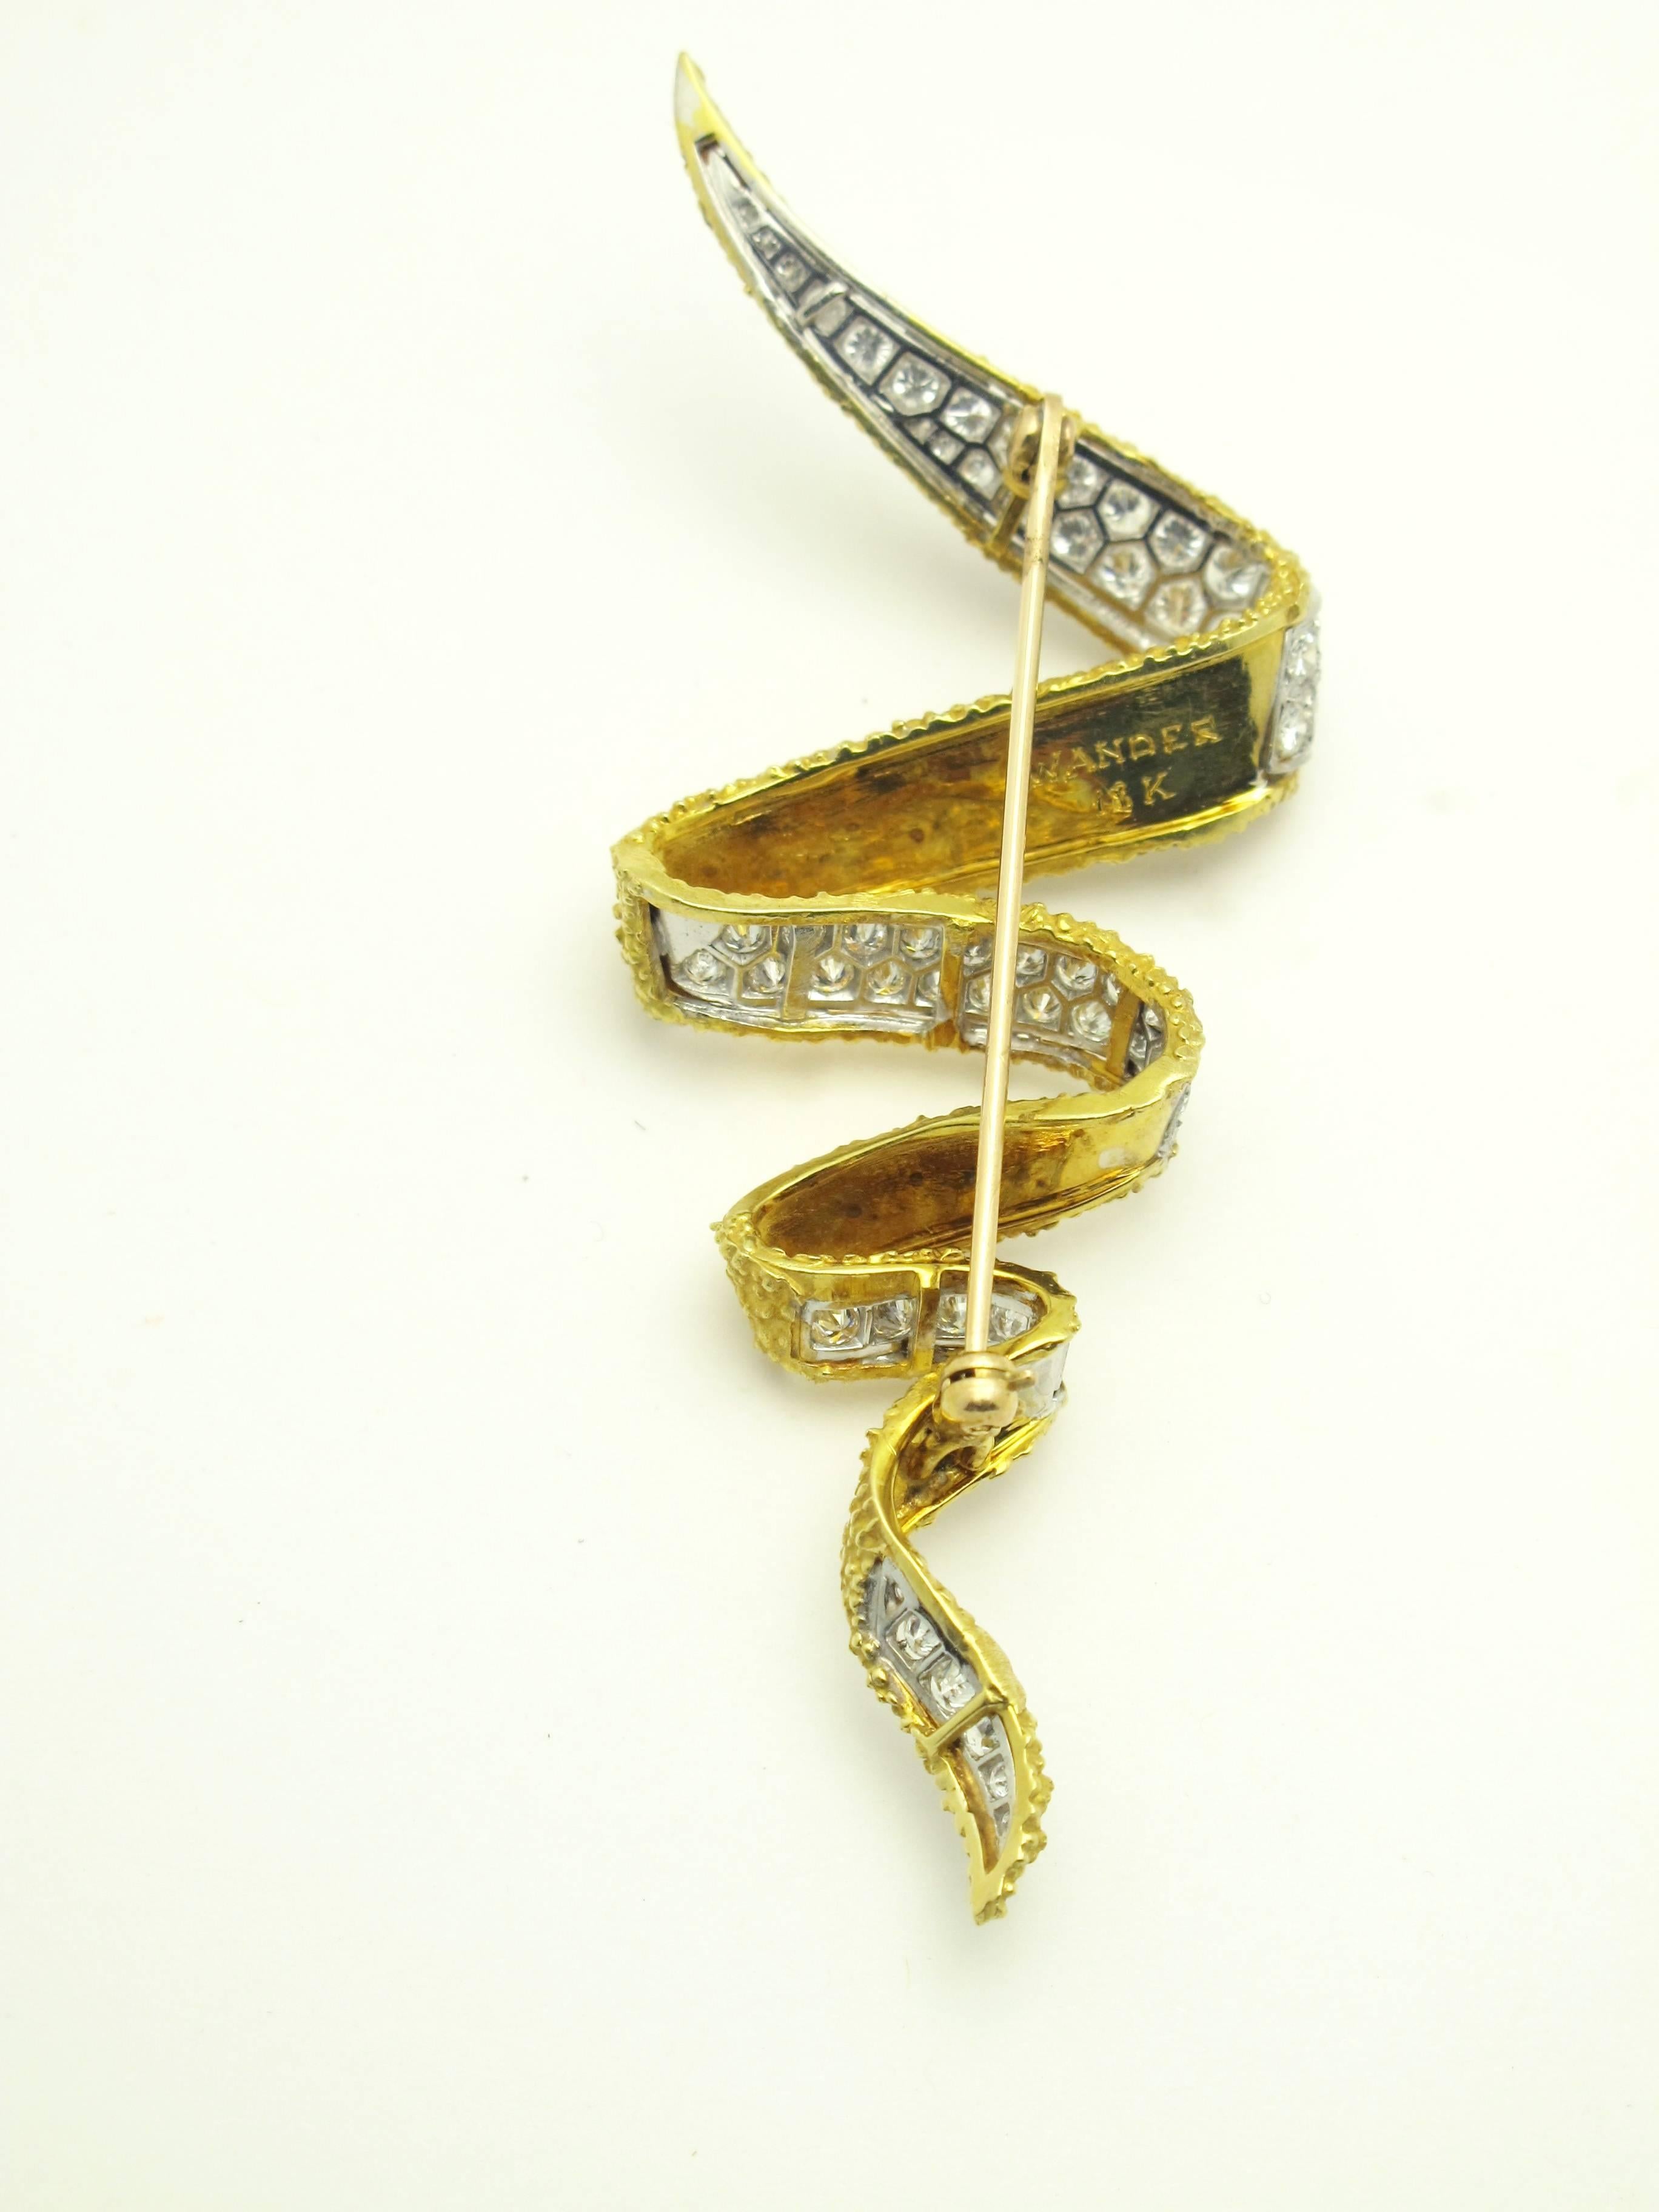 Wander gold and a diamond ribbon brooch set in 18kt white and yellow gold with 4 carats of diamonds average color G/H clarity VS.